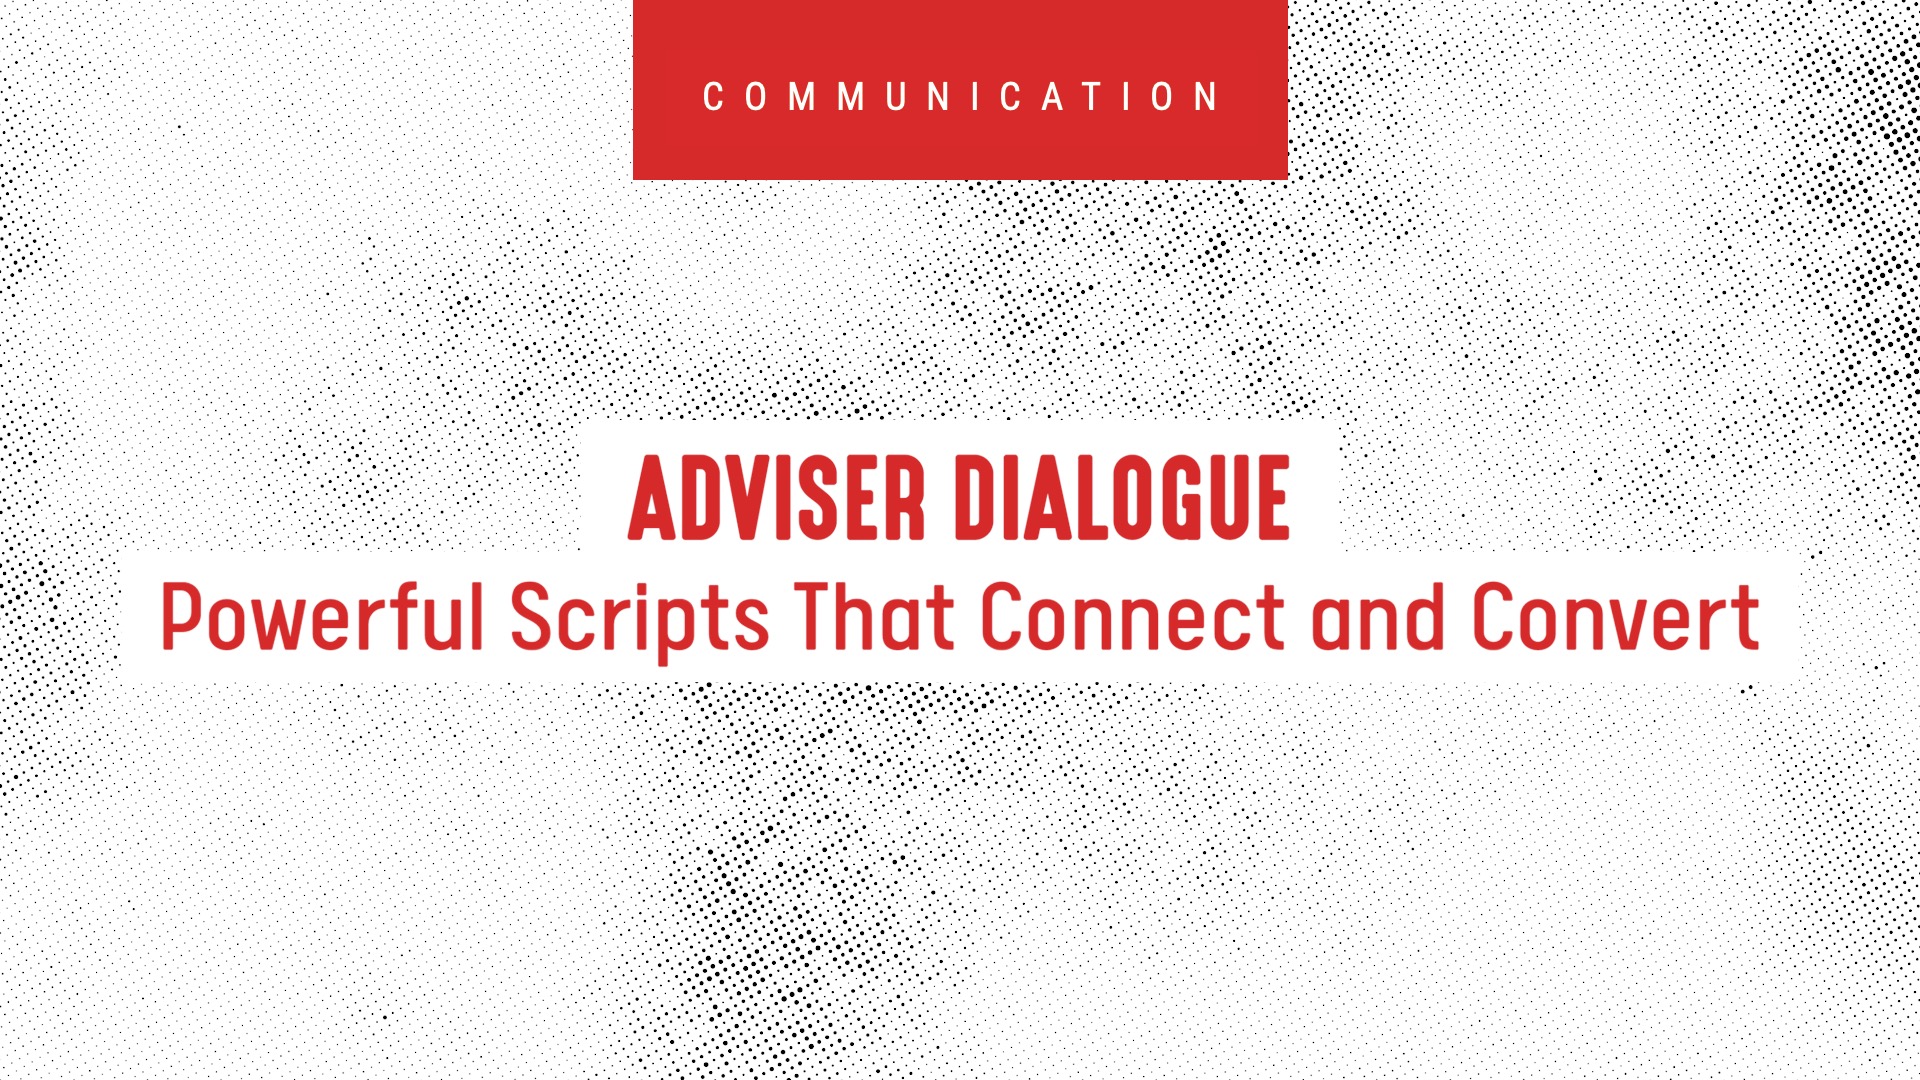 Adviser Dialogue: Powerful Scripts That Connect and Convert